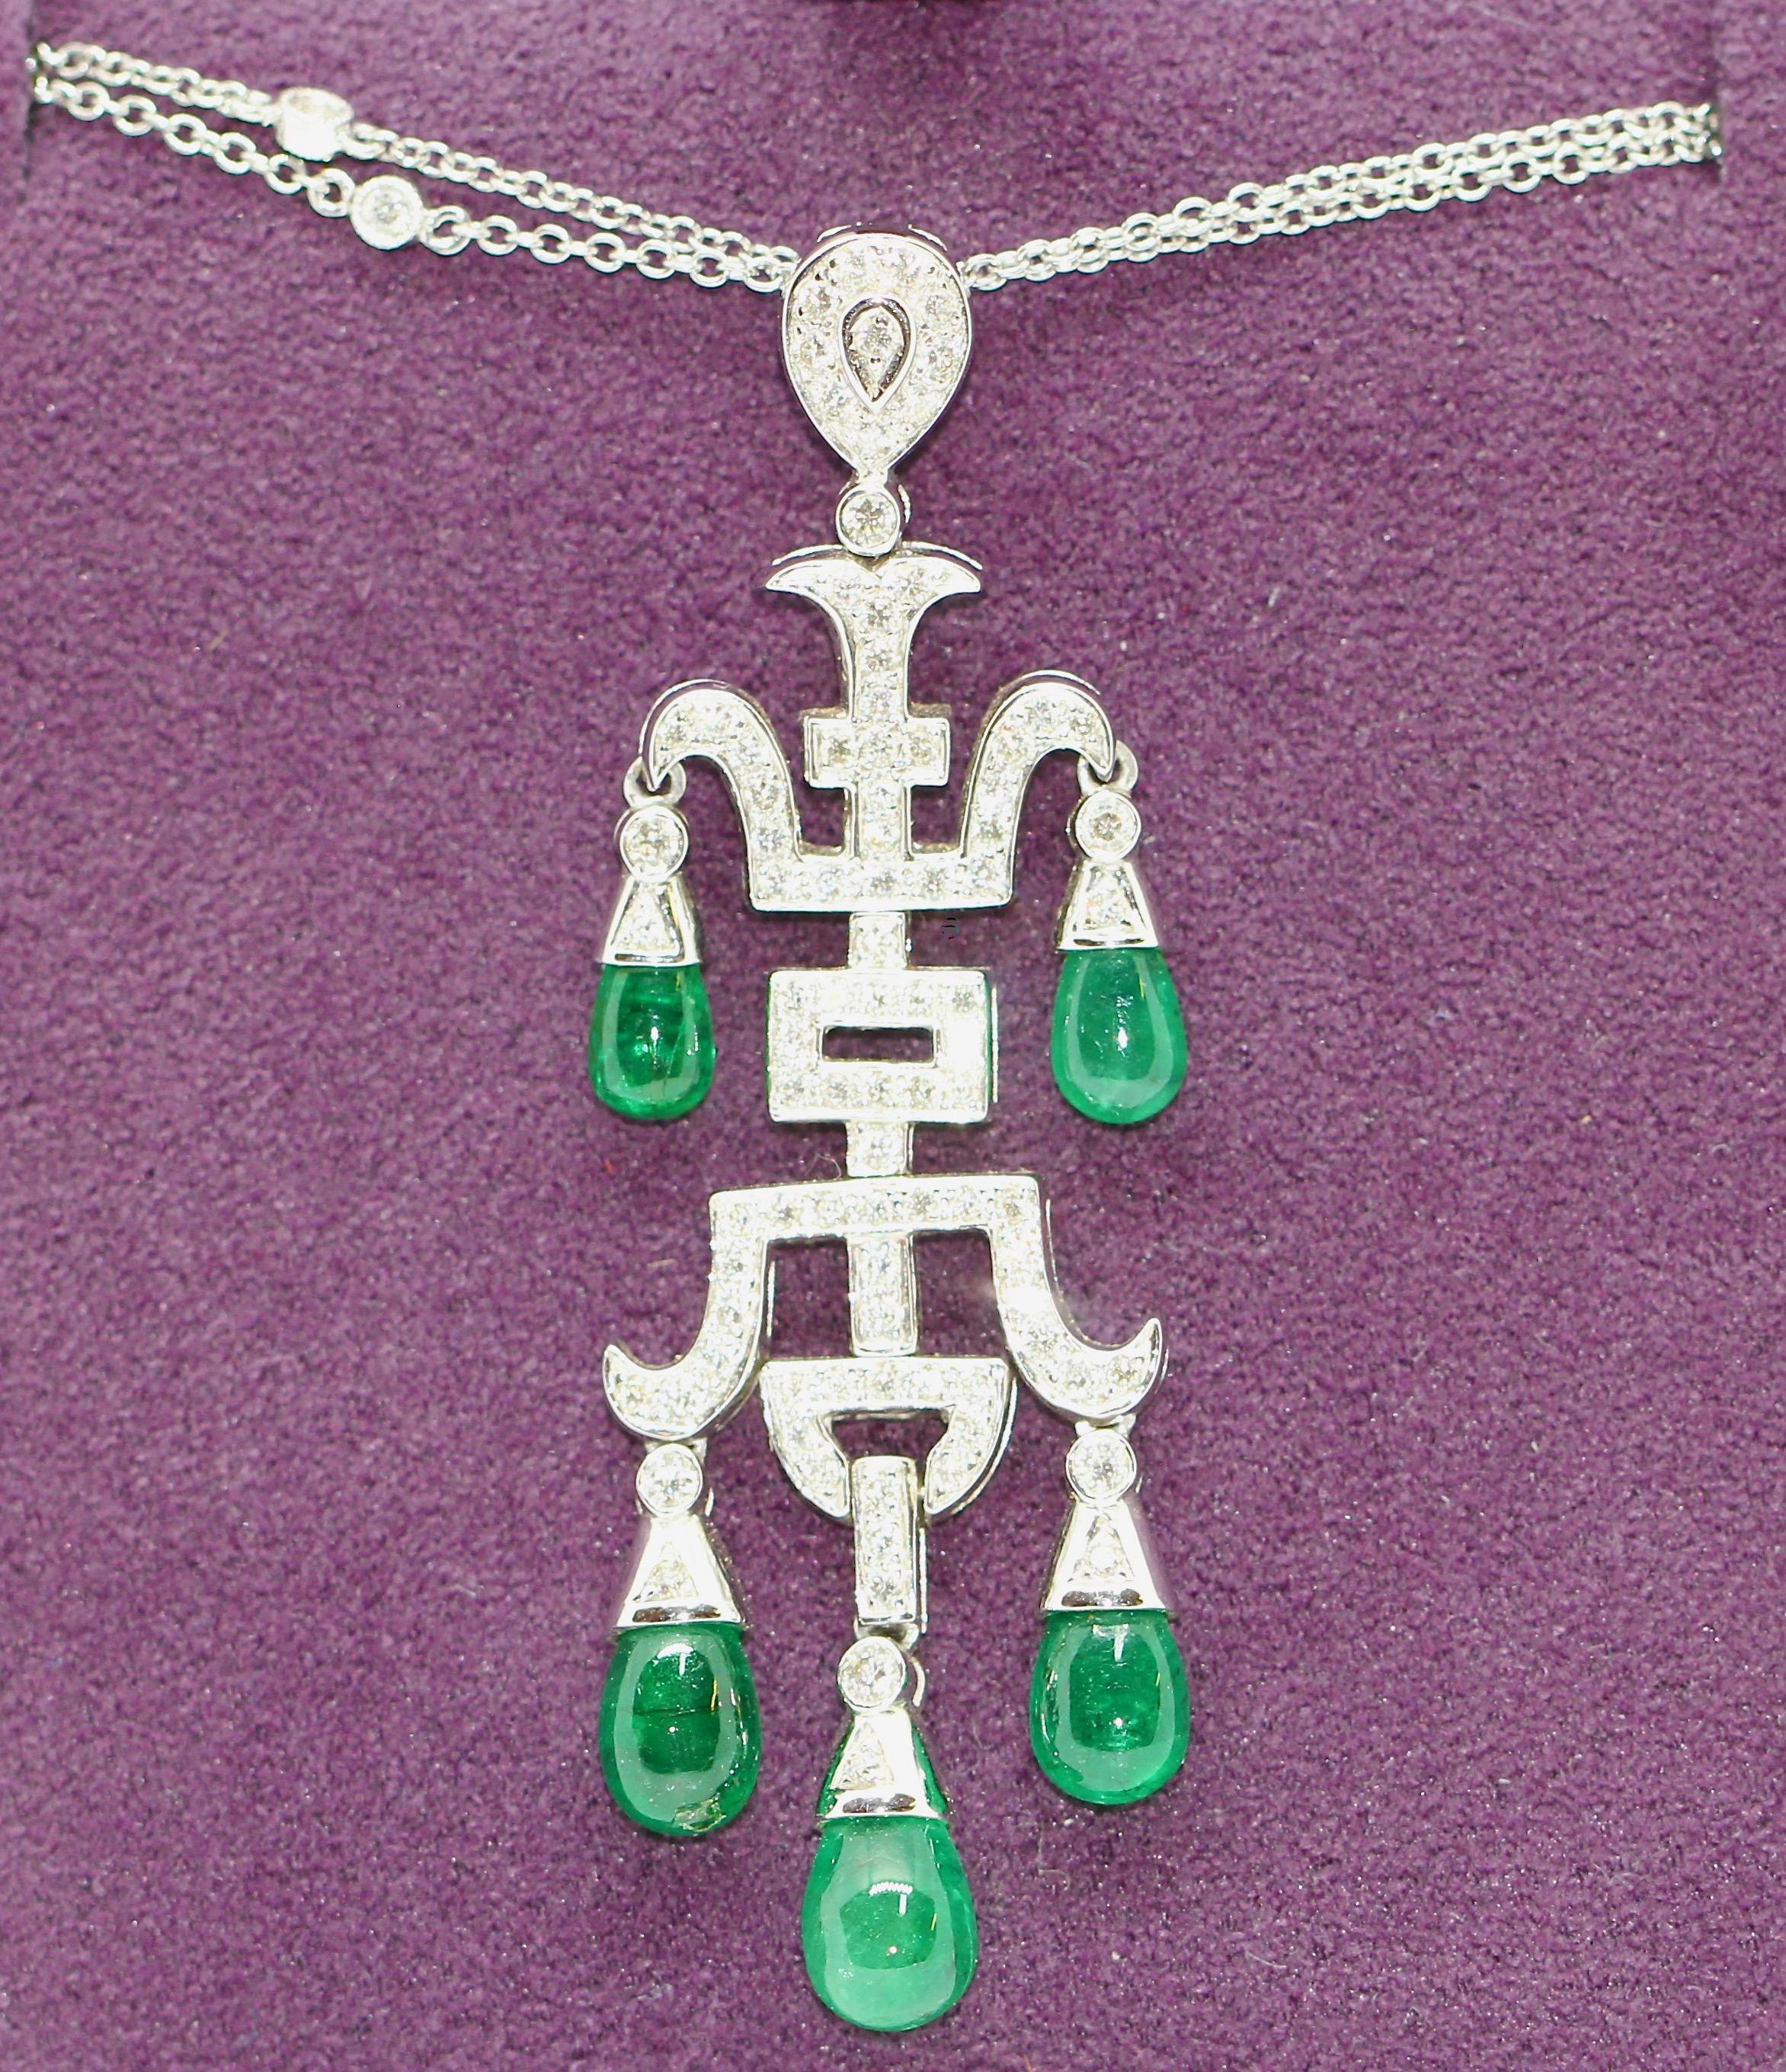 Ladies Diamond and Emerald Pendant, Necklace. 18 Karat White Gold

Set with 91 diamonds, total weight 0.93 ct.
(VS, H)

5 Emeralds Drop-Shaped

Including matching, two-row white gold chain with small diamonds.

Purest handcraft, from a renowned